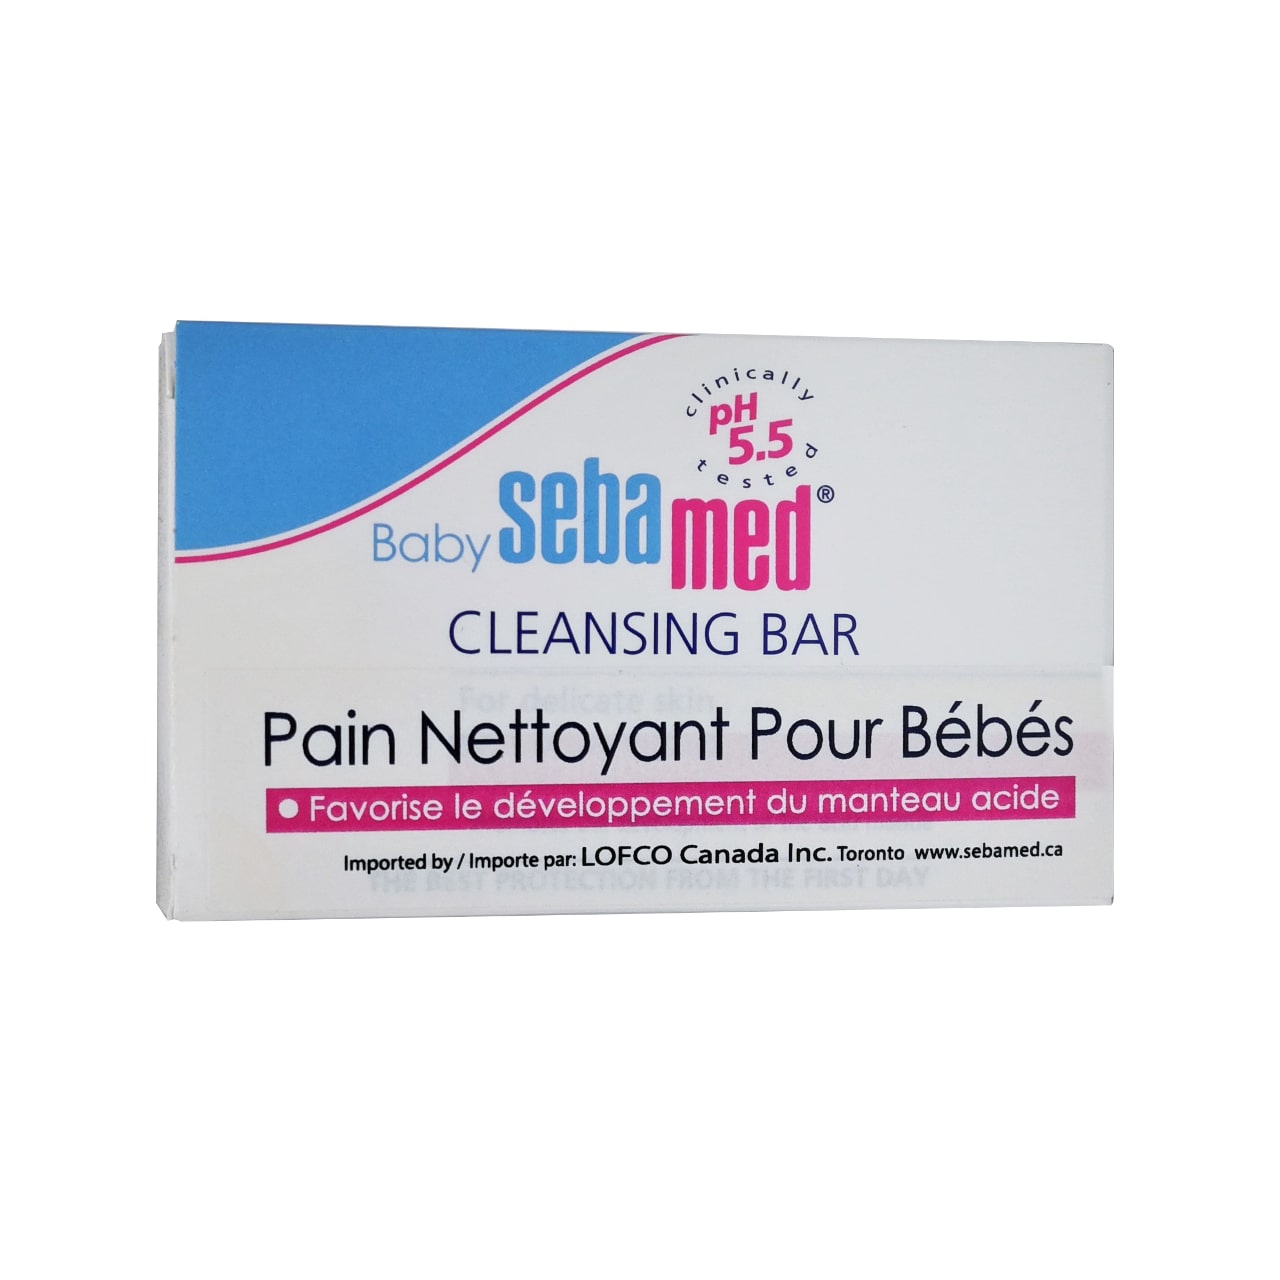 Package label for Baby Sebamed Cleansing Bar in French